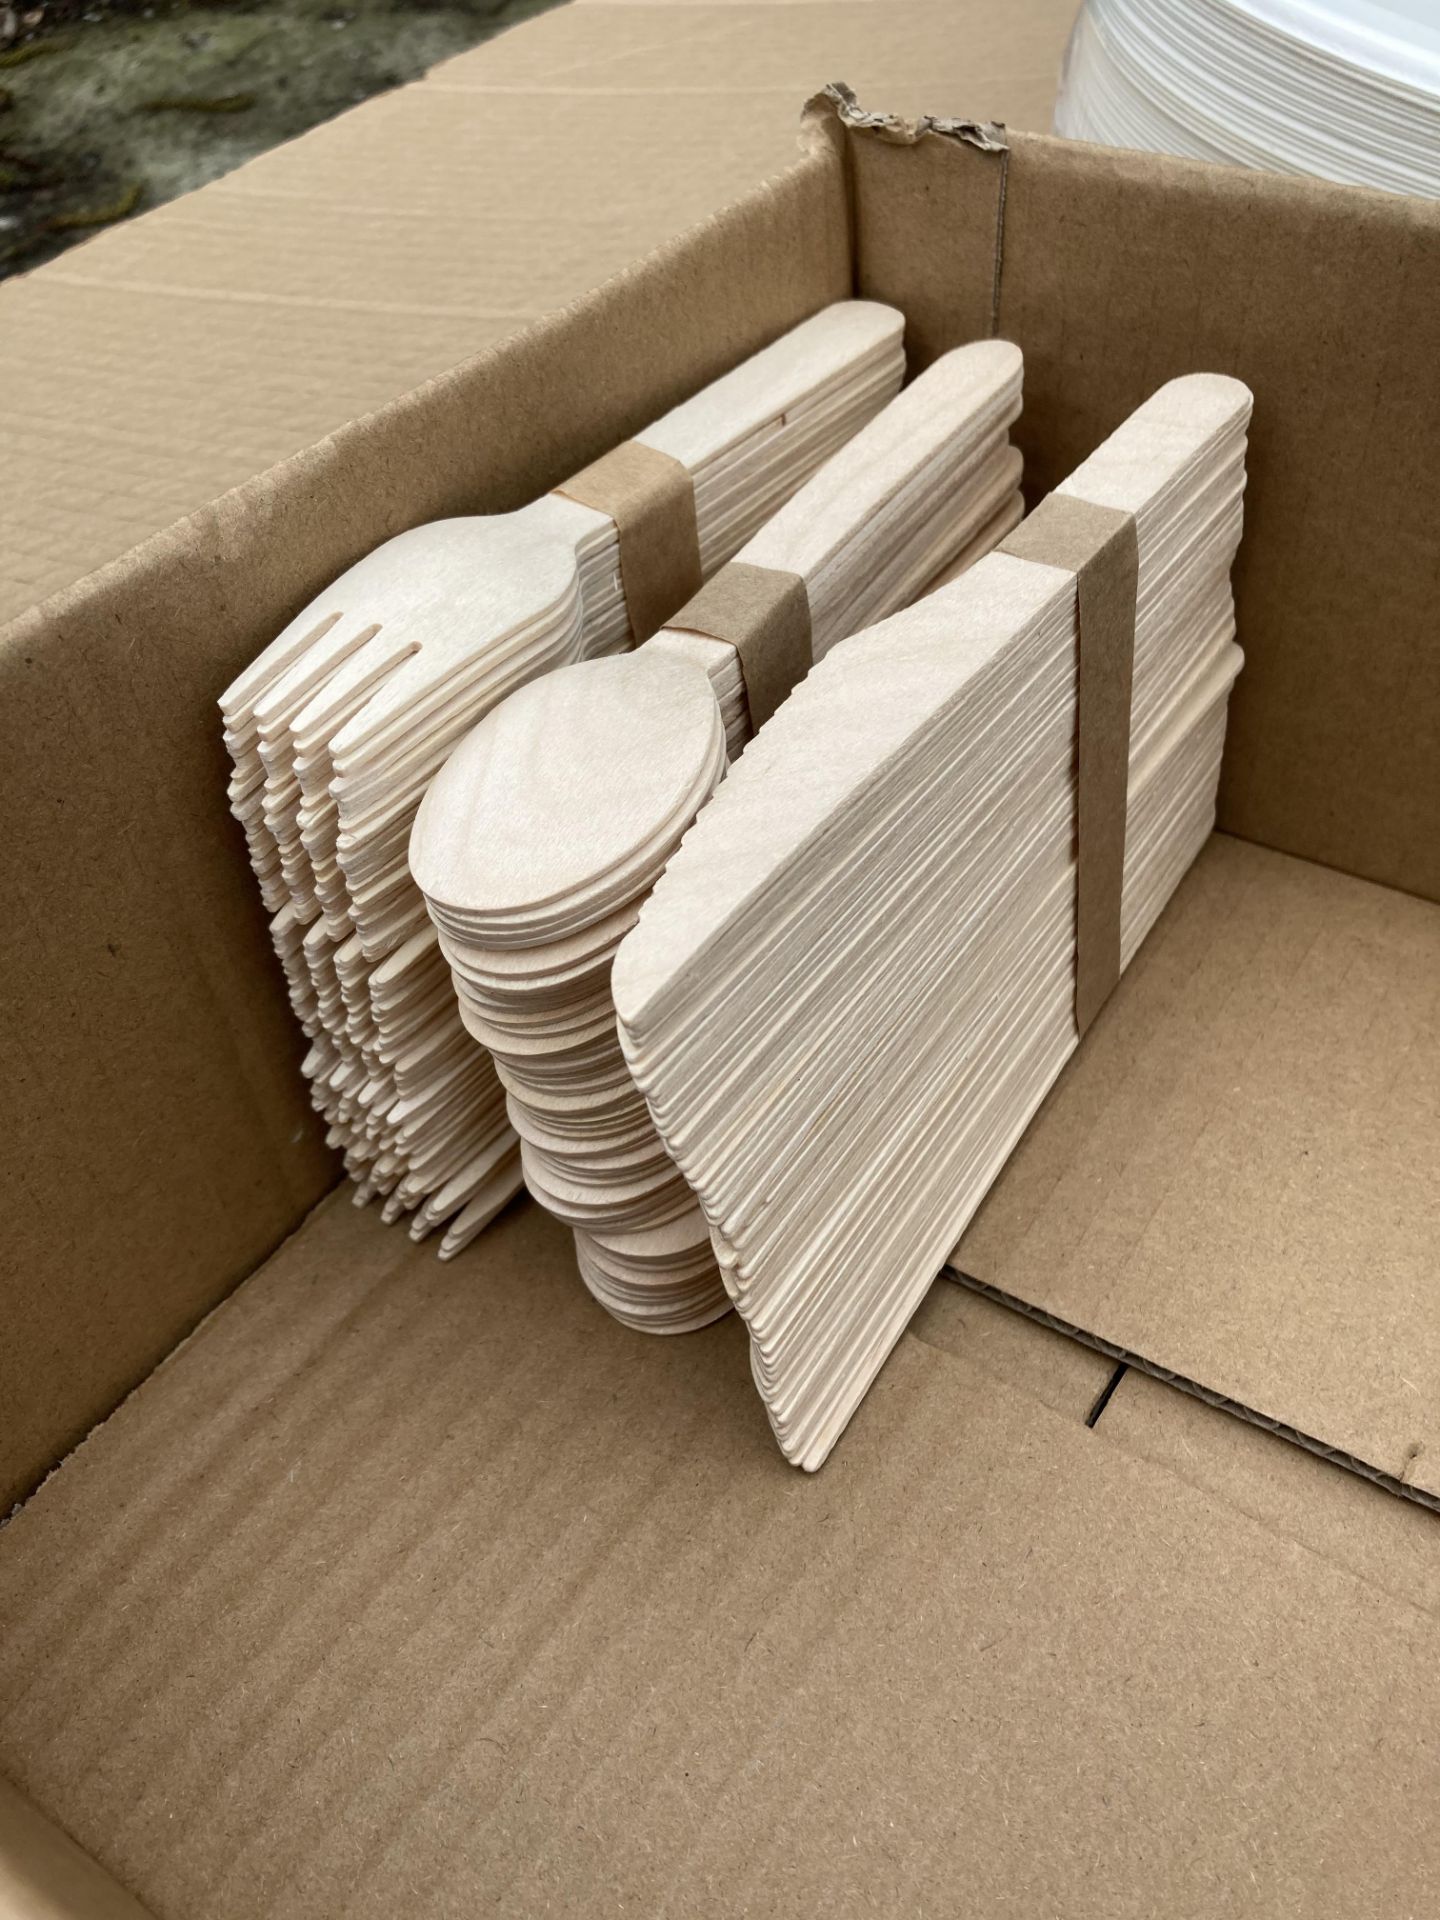 48 x Boxes of approximately 100 x Wooden Cutlery and Paper Plates (4 x outer boxes) (saleroom - Image 2 of 3